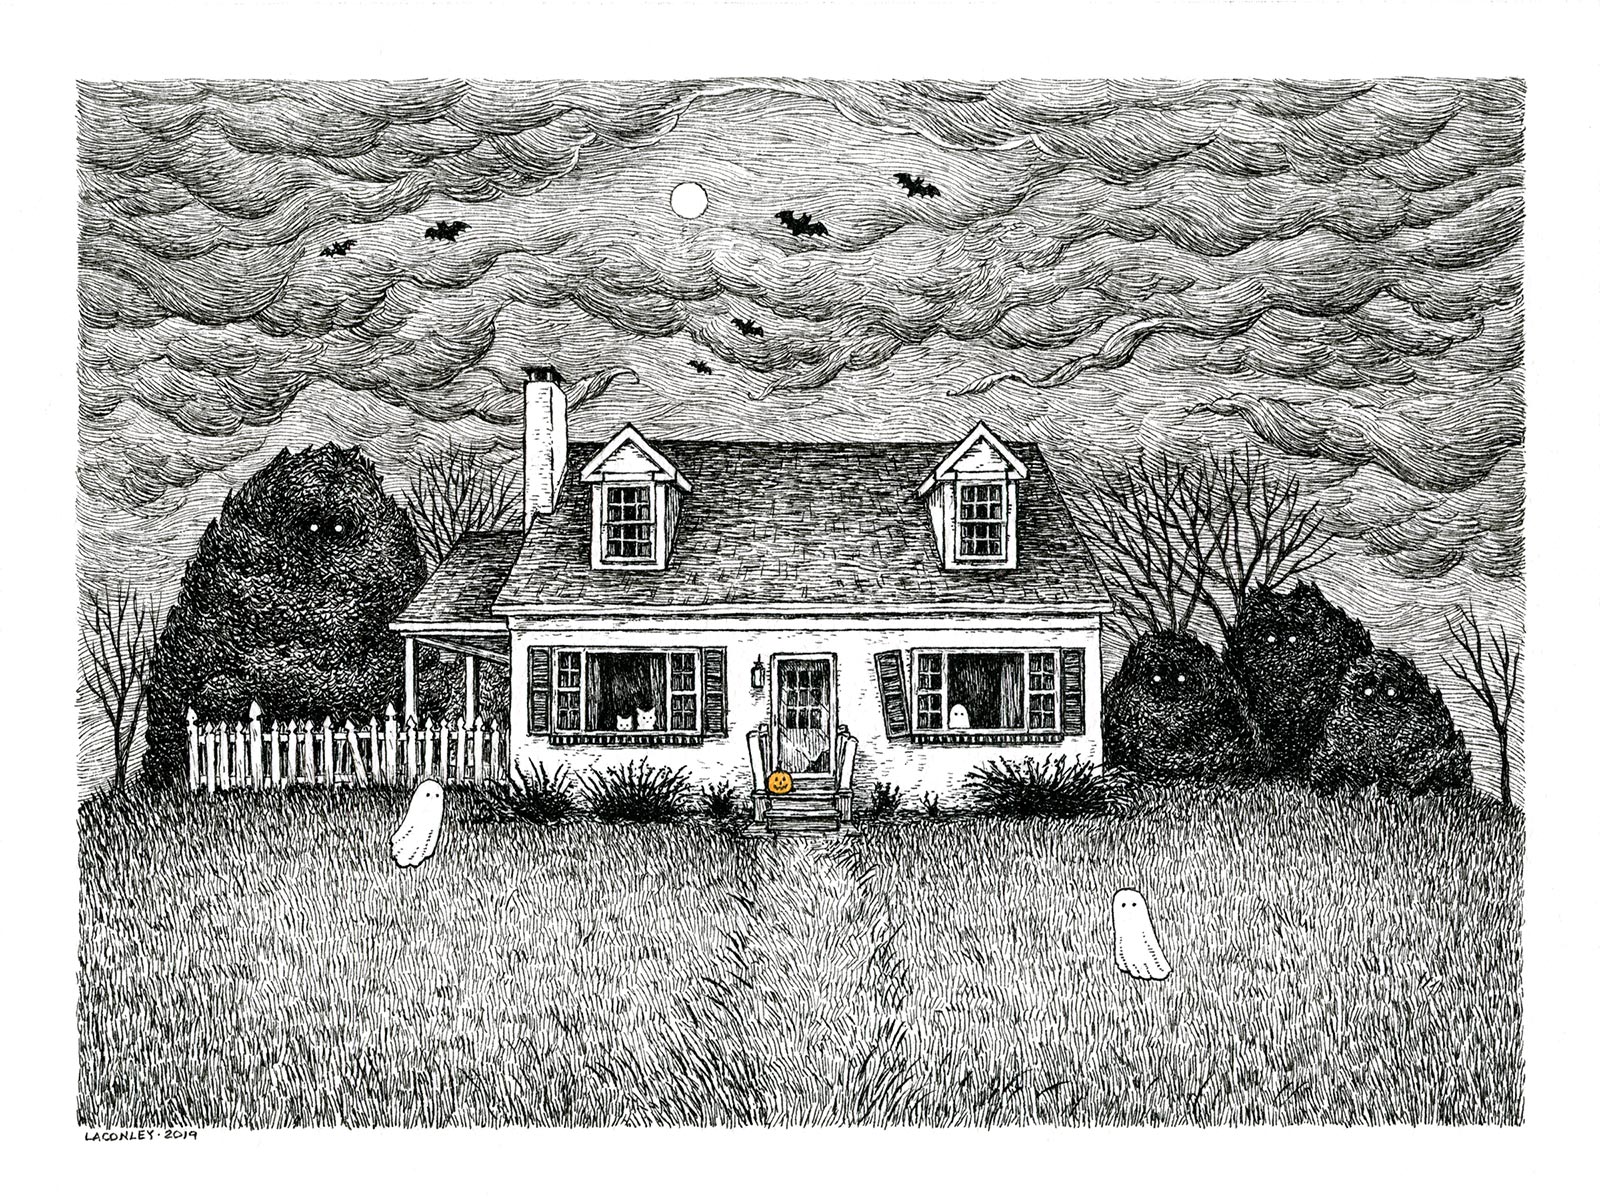 Laurie A. Conley works in pen and ink, creating book illustrations and gent...